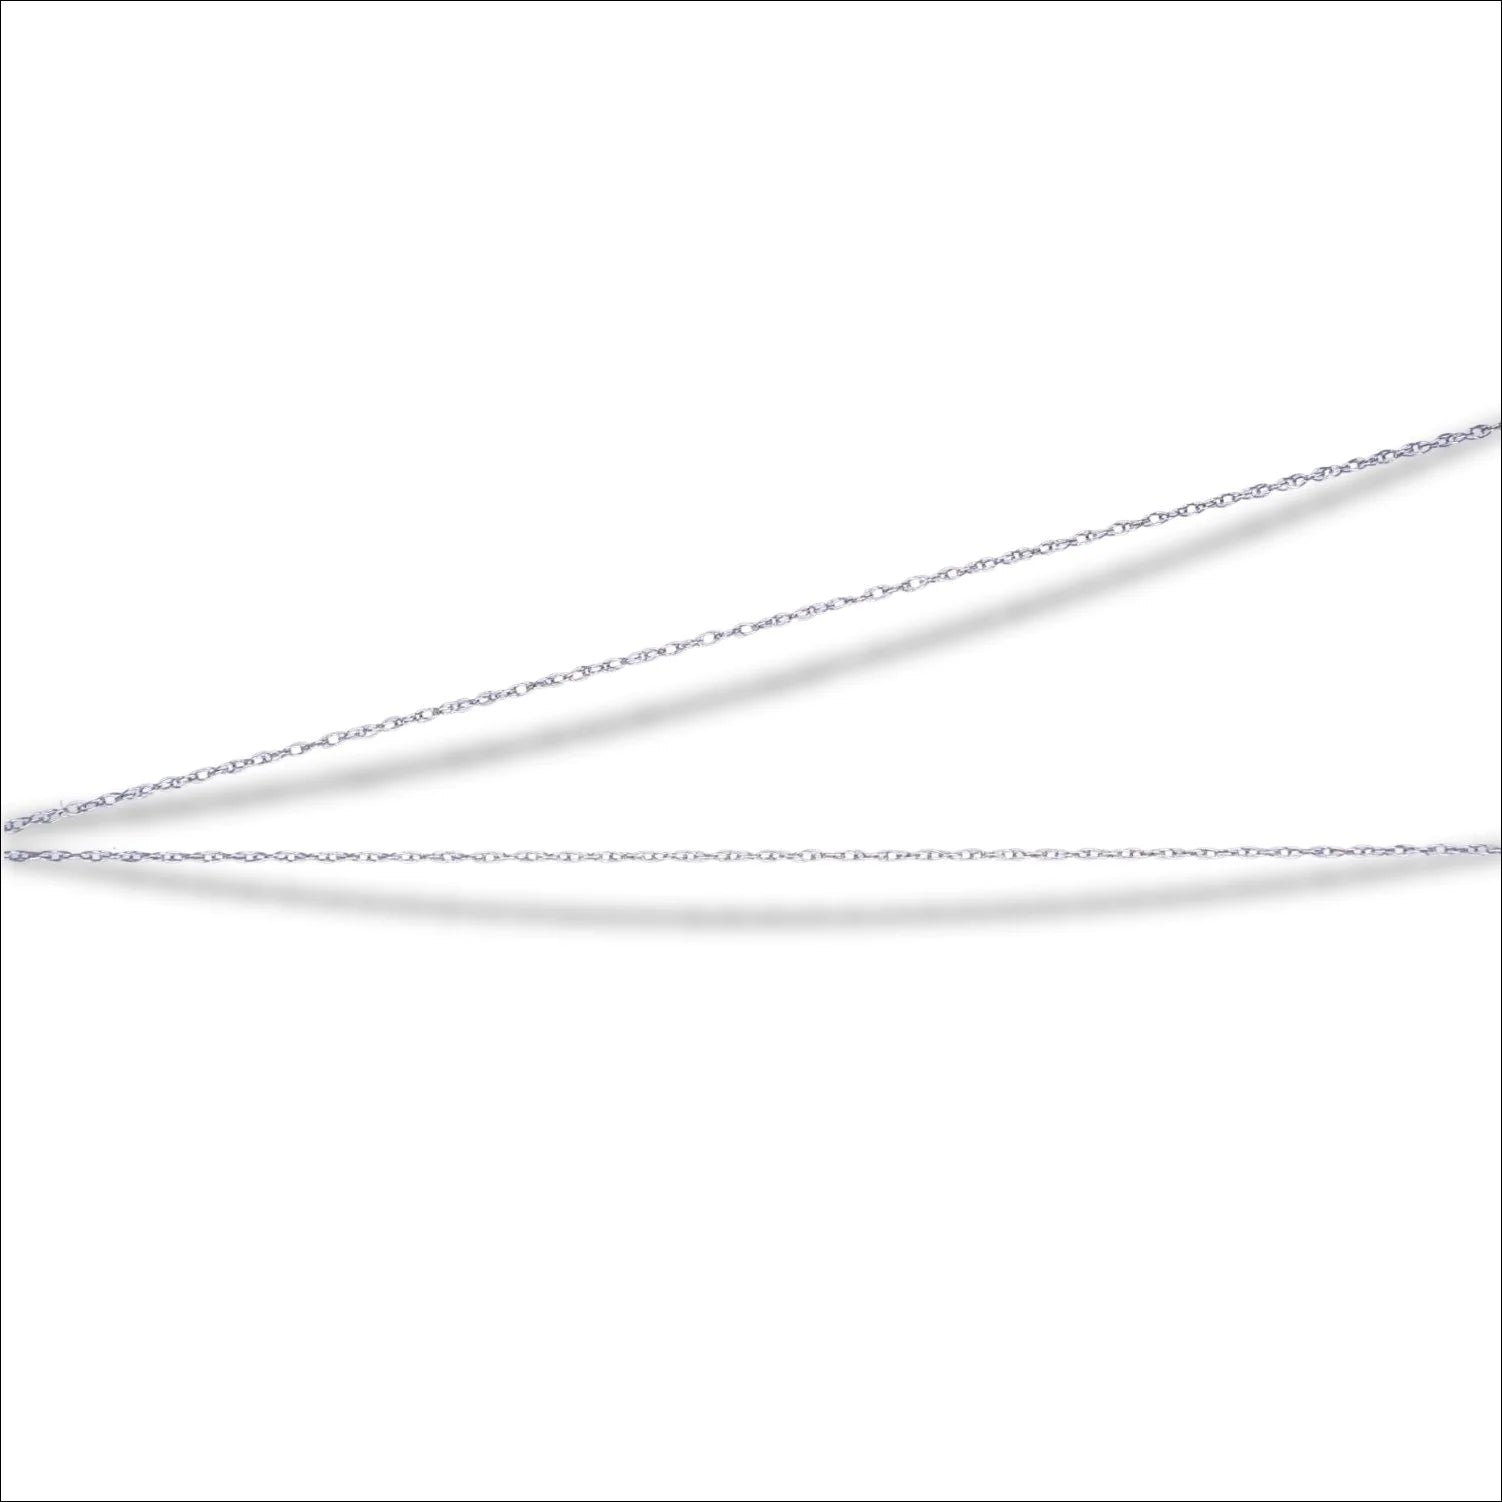 Dainty 14k white gold rope chain | Necklaces